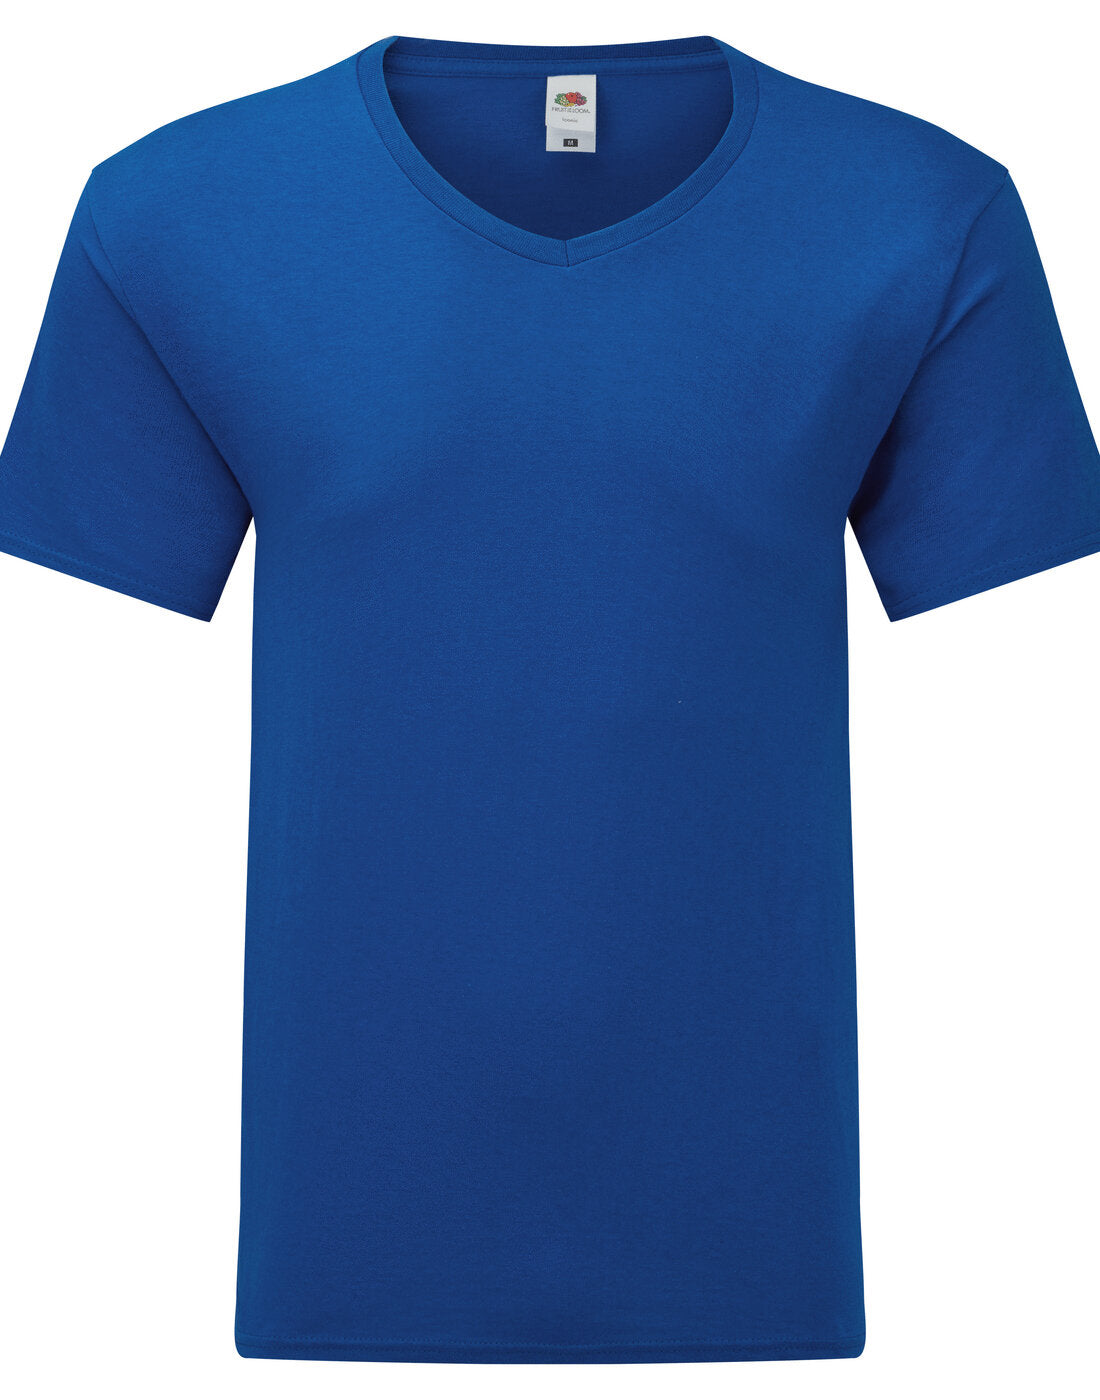 Fruit of the Loom Iconic V Neck T - Royal